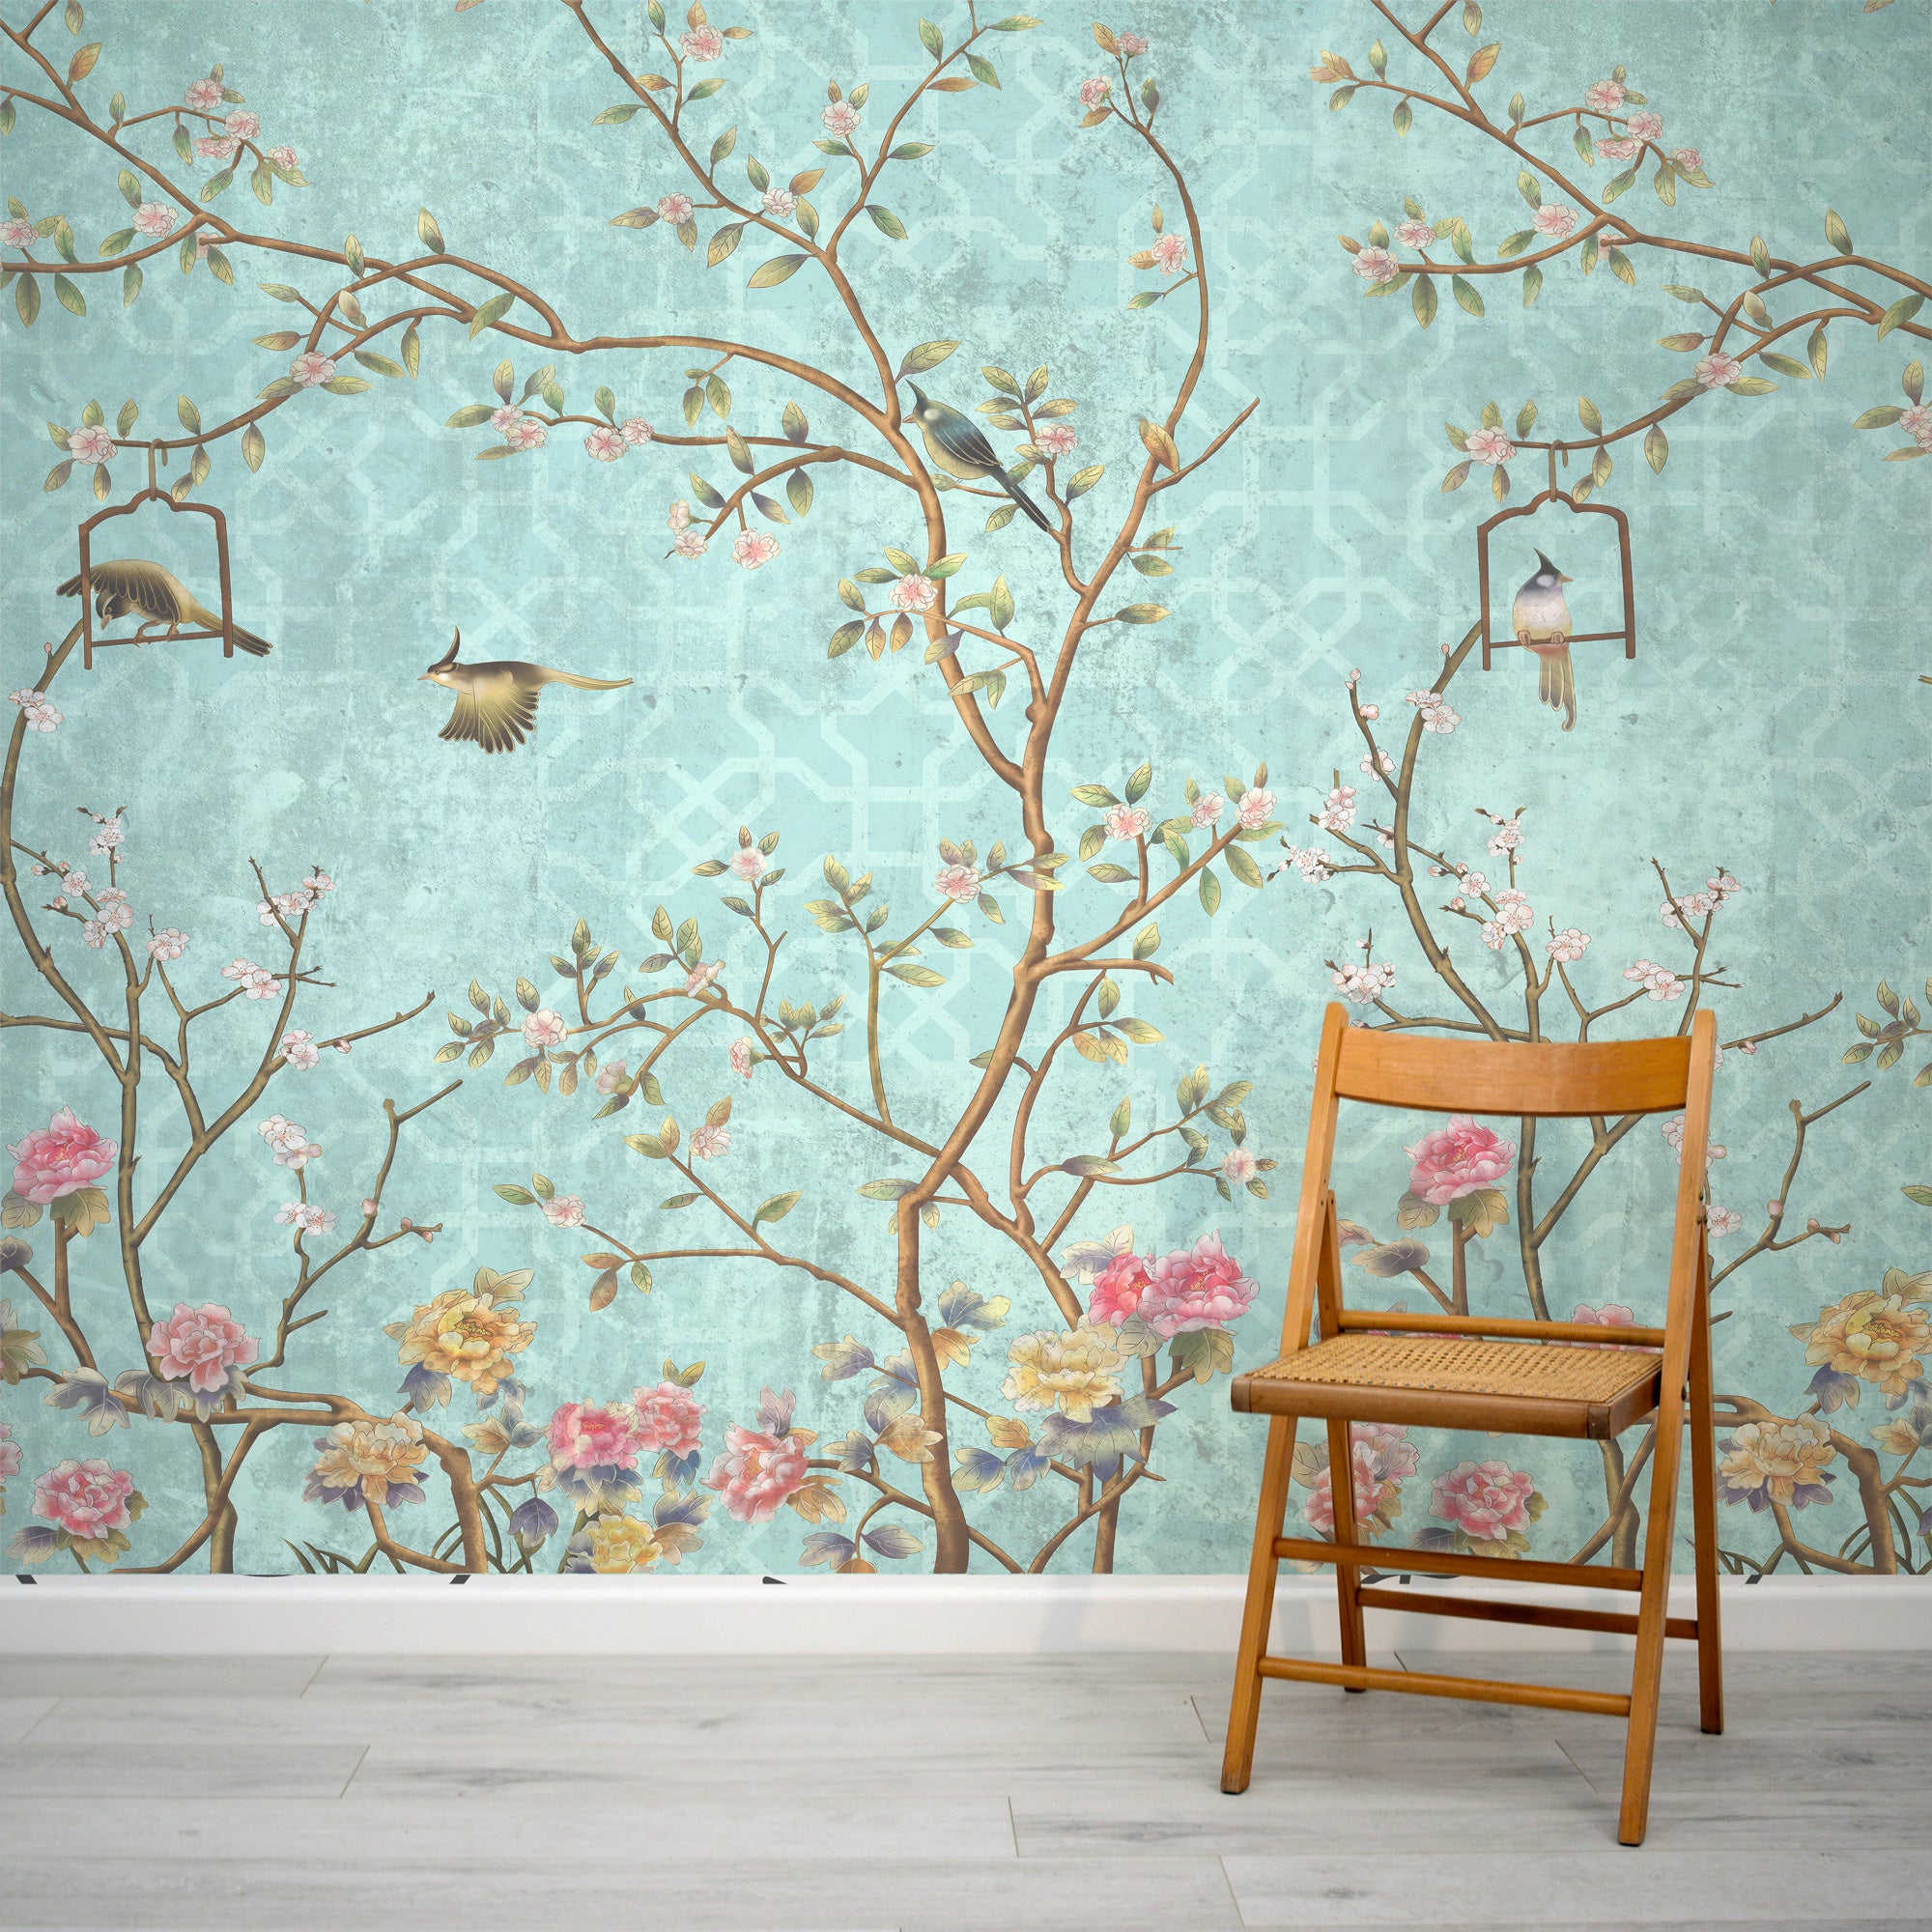 Fleurs de peinture à l'huile et oiseaux Floral Wallpaper Wall Mural,  Abstract Shabby Retro Cherry Branches with Resting Birds Wall Mural Wall  Decor -  France